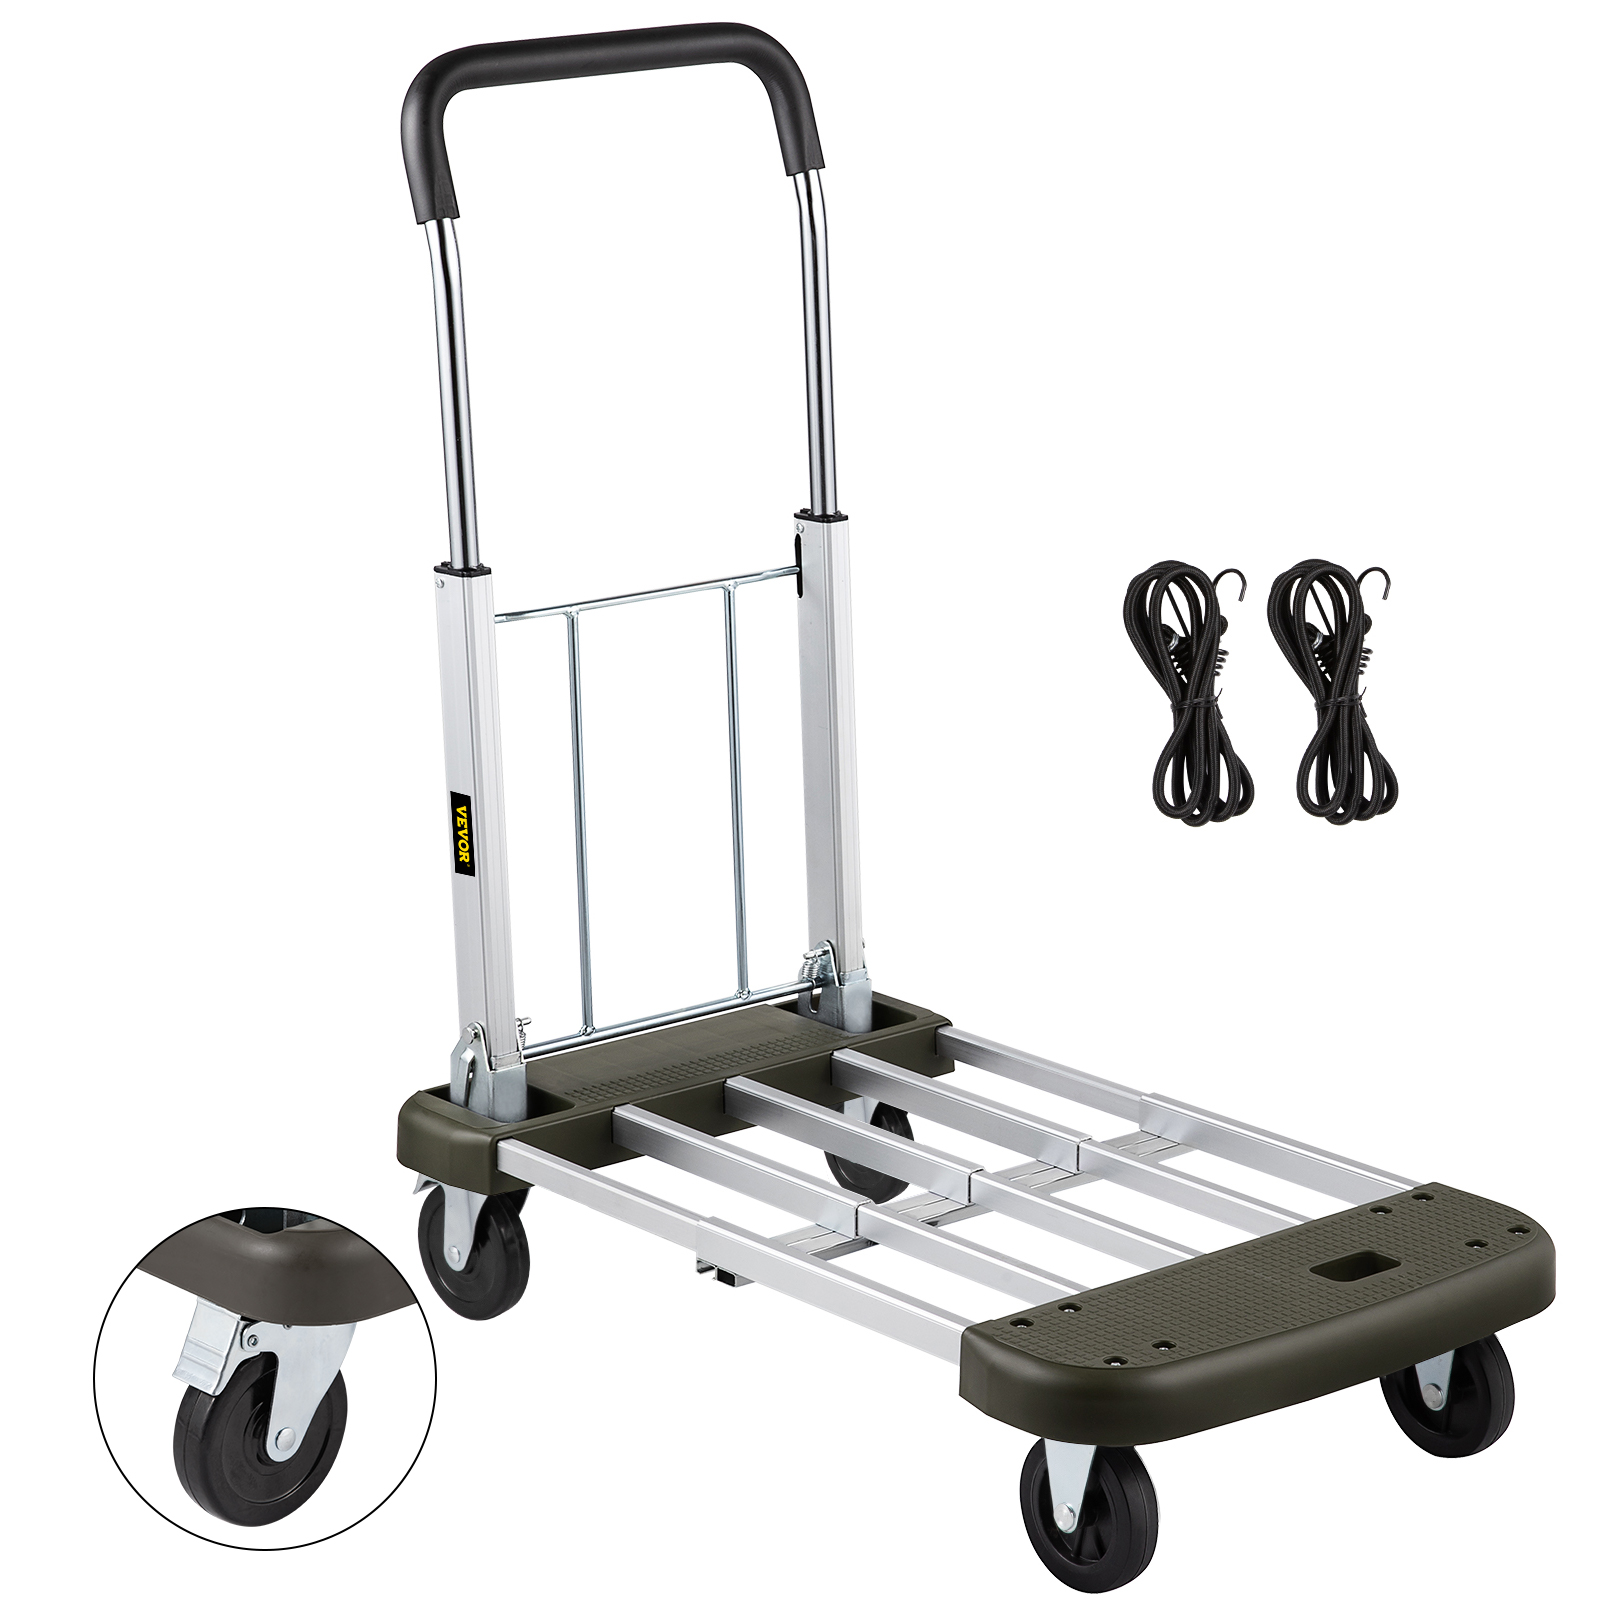 Portable Cart Folding Dolly Push Truck Hand Collapsible Trolley Luggage 220 lbs 